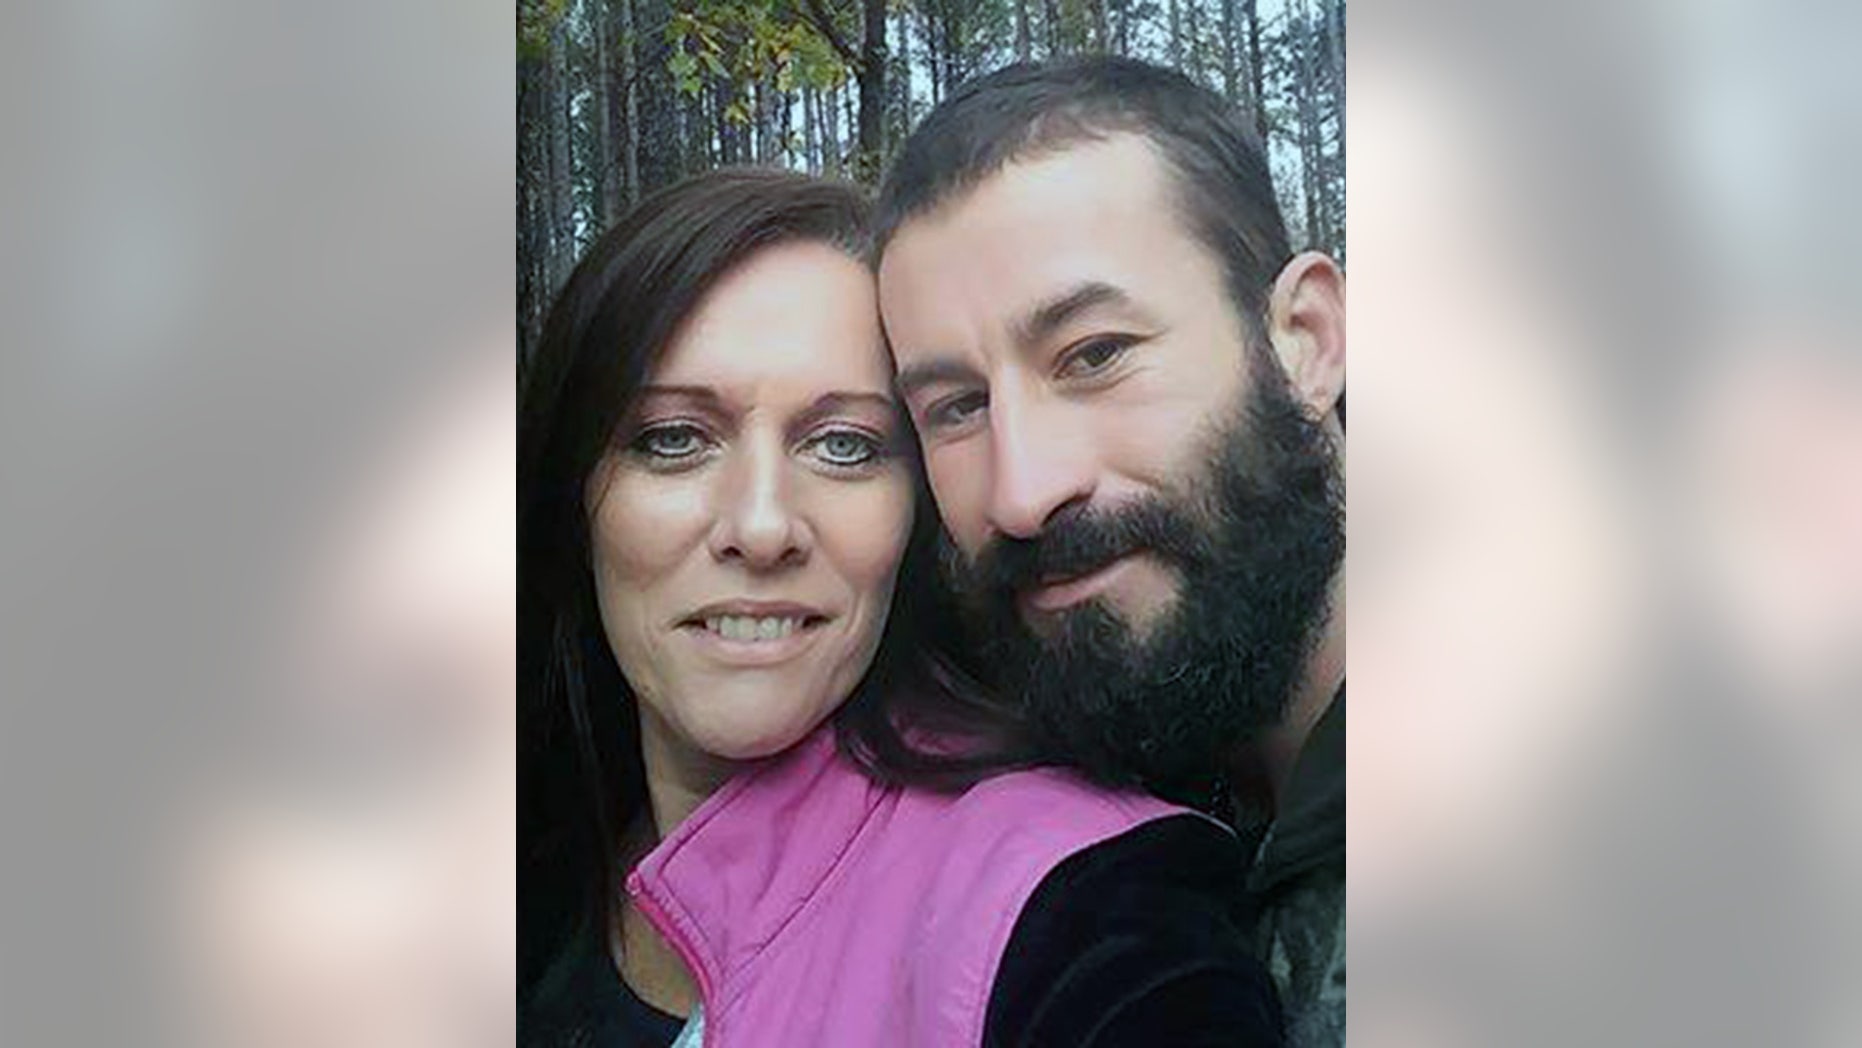 Missing Georgia couple found dead in apparent murder-suicide, police say